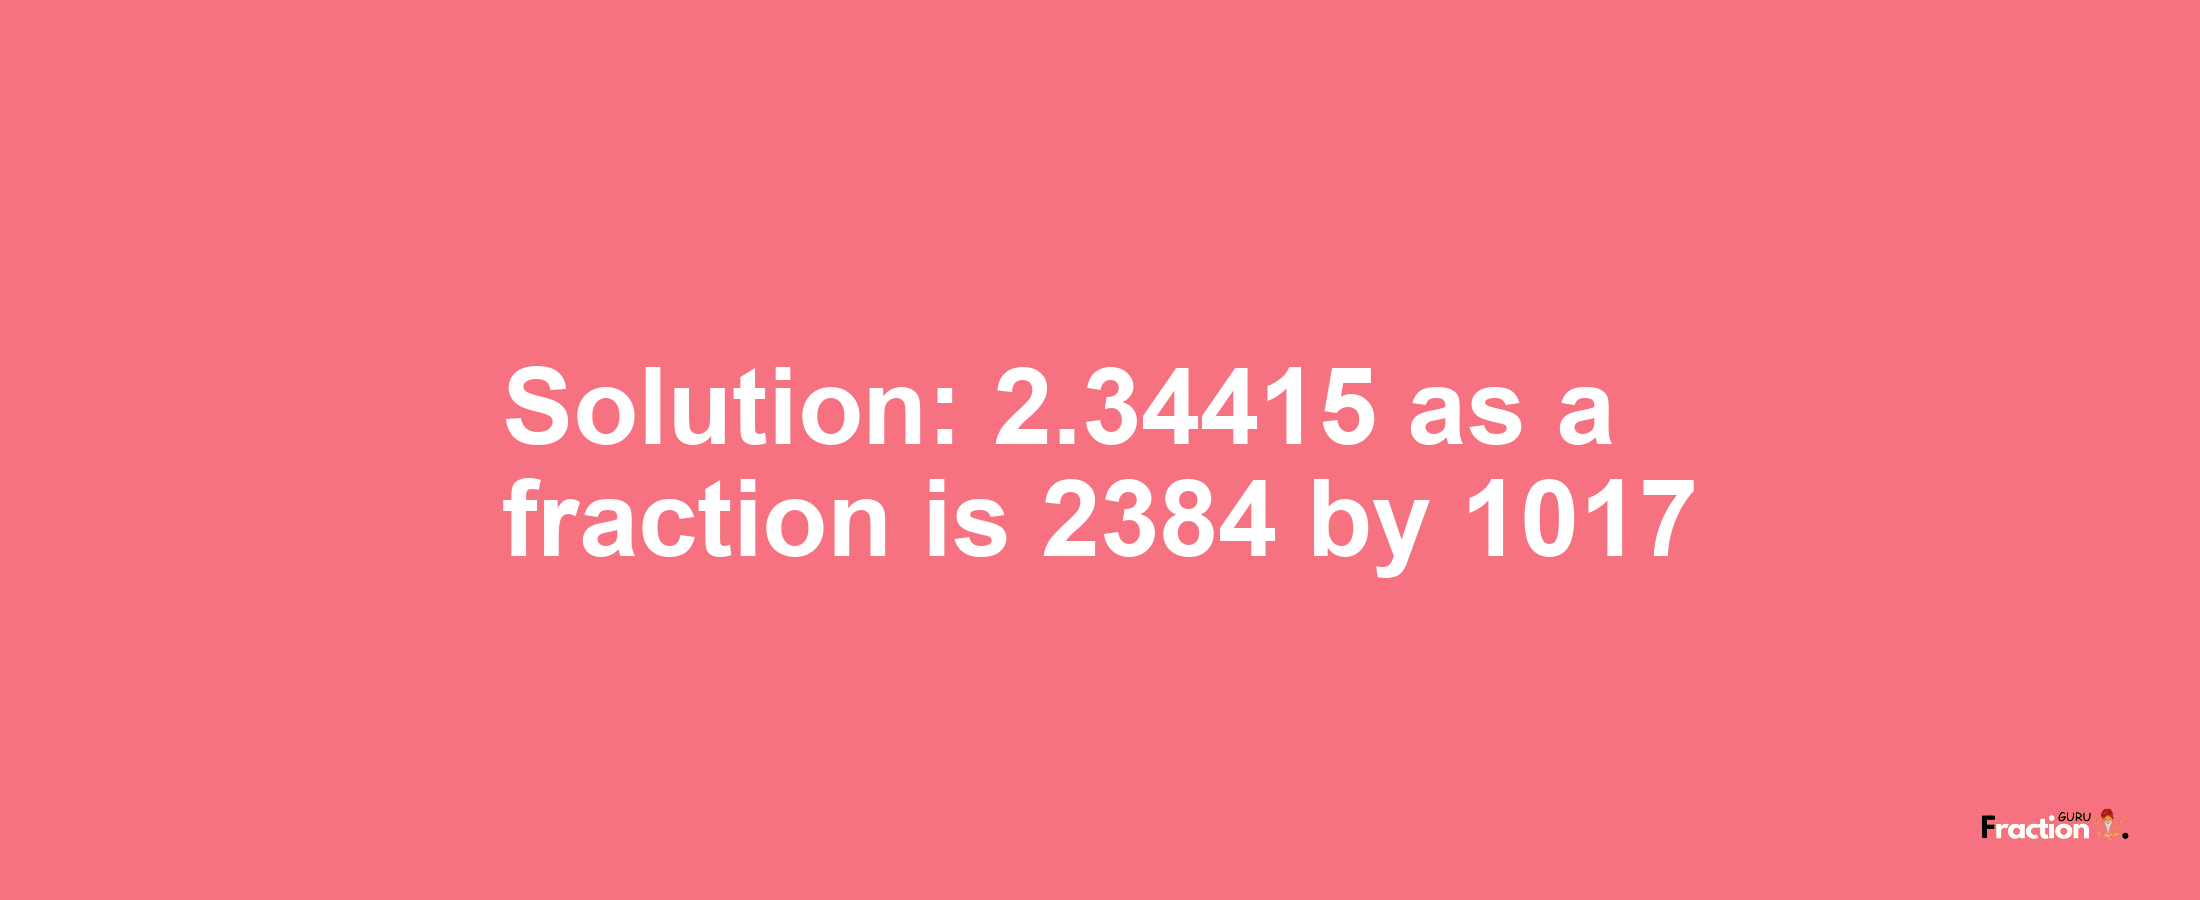 Solution:2.34415 as a fraction is 2384/1017